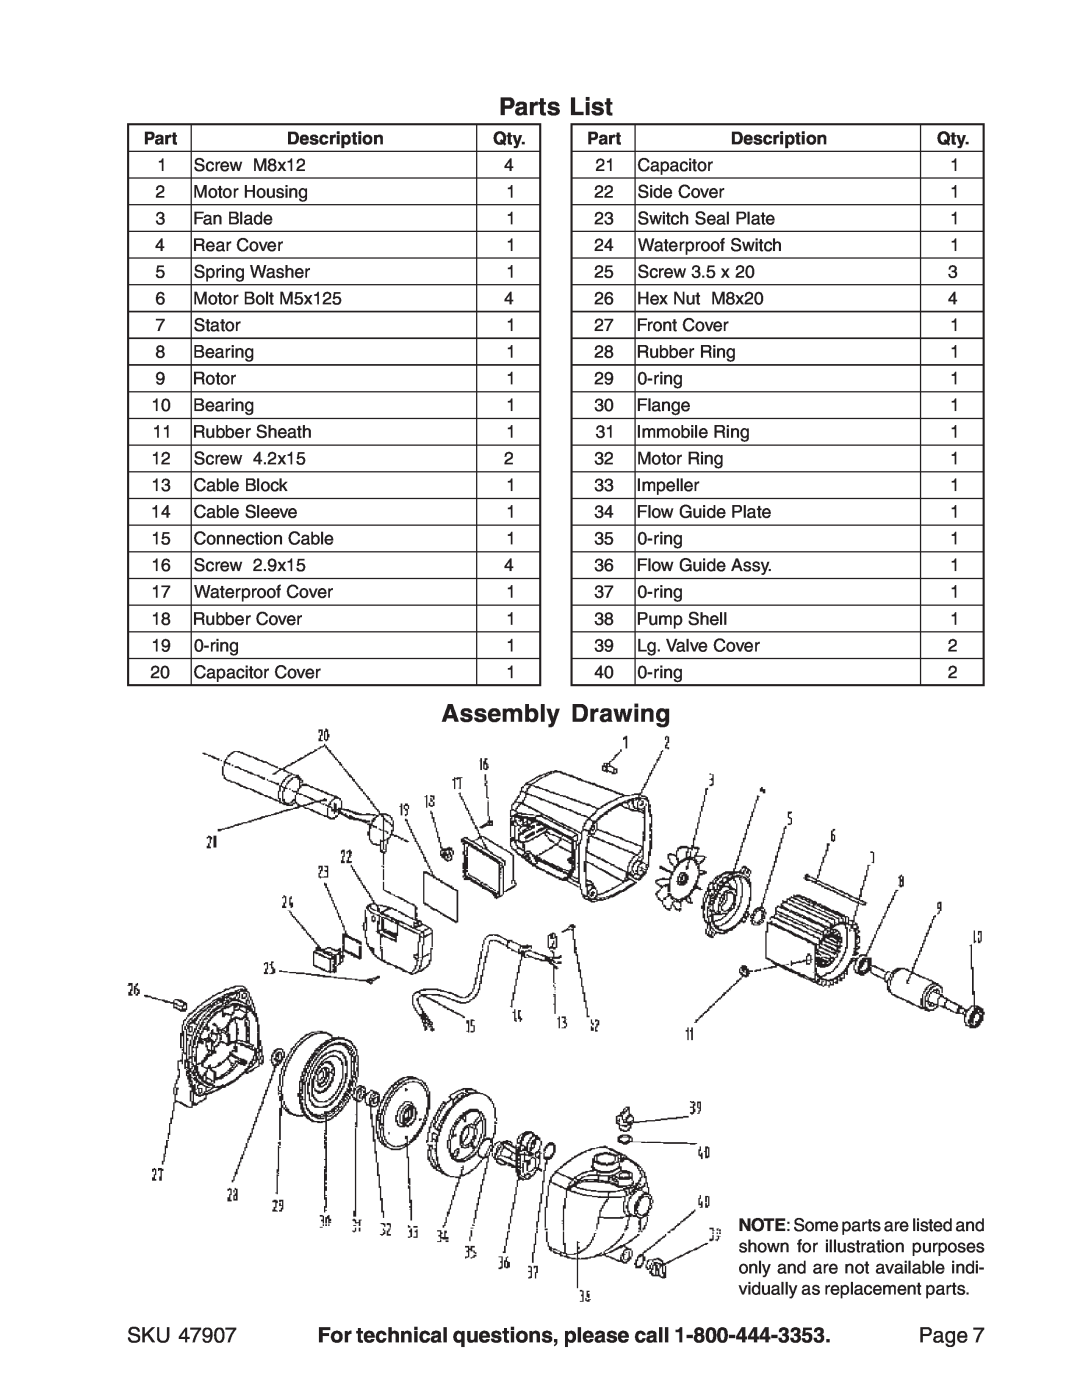 Harbor Freight Tools 47907 Parts List, Assembly Drawing, For technical questions, please call, Page, Description 